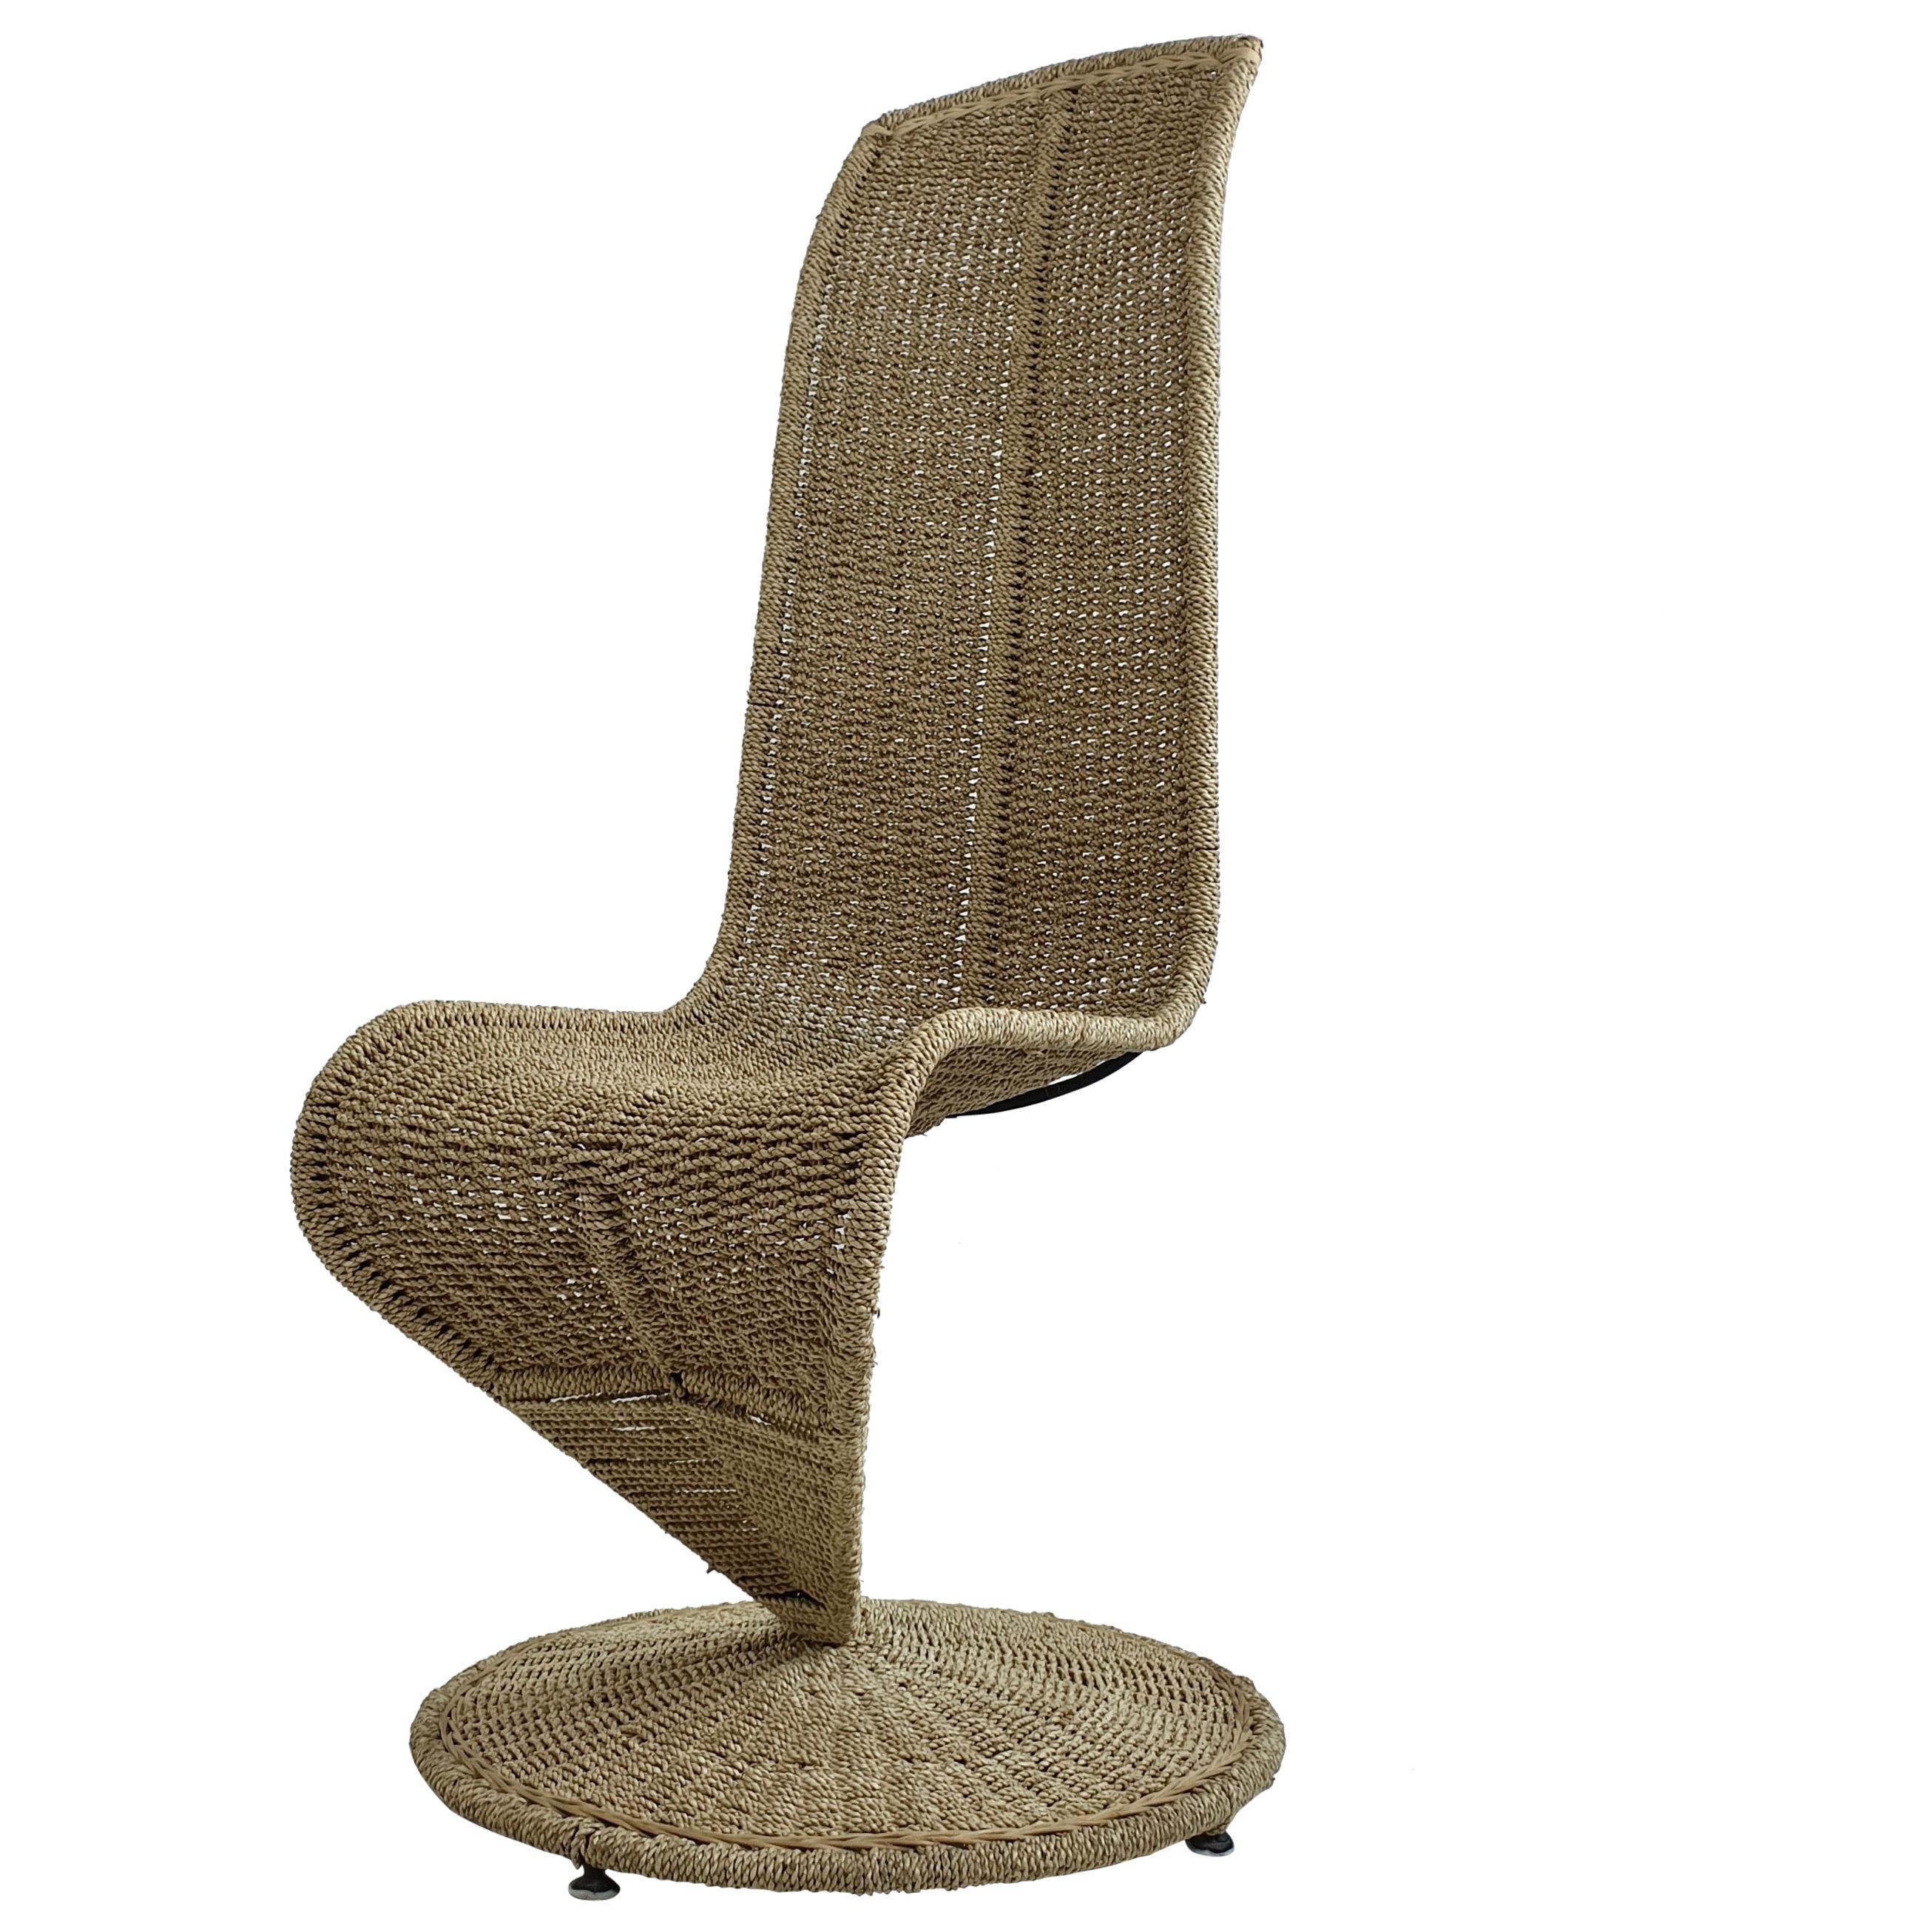 Midcentury Woven Rope 'S' Chair by Marzio Cecchi, Italy, circa 1970 For Sale